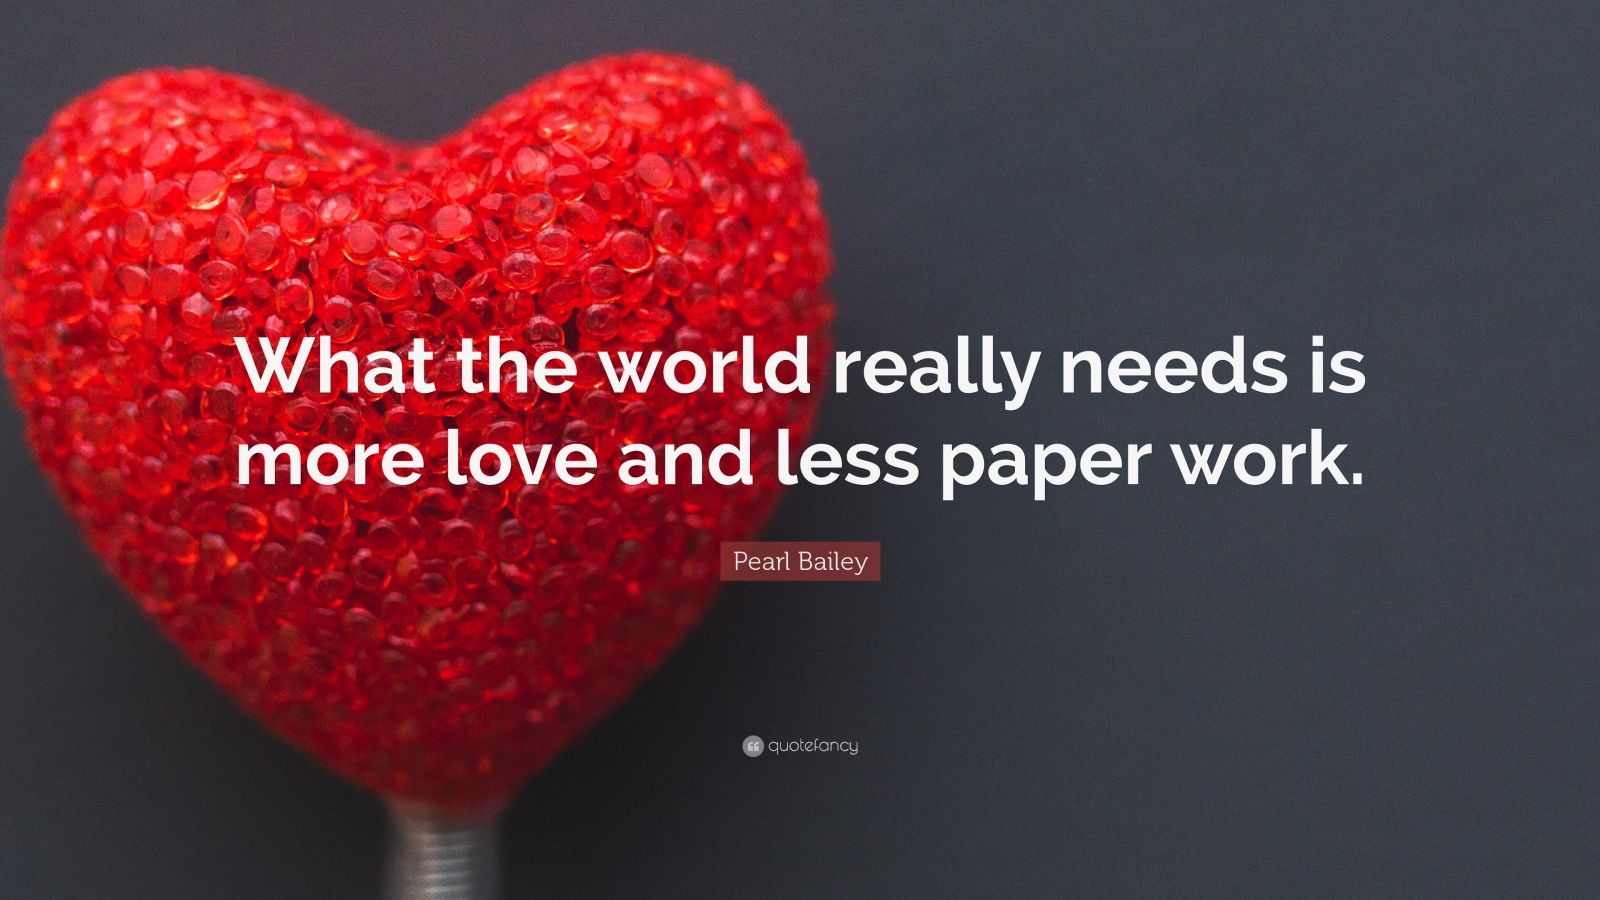 Pearl Bailey Quotes (24 wallpapers) - Quotefancy6 日前